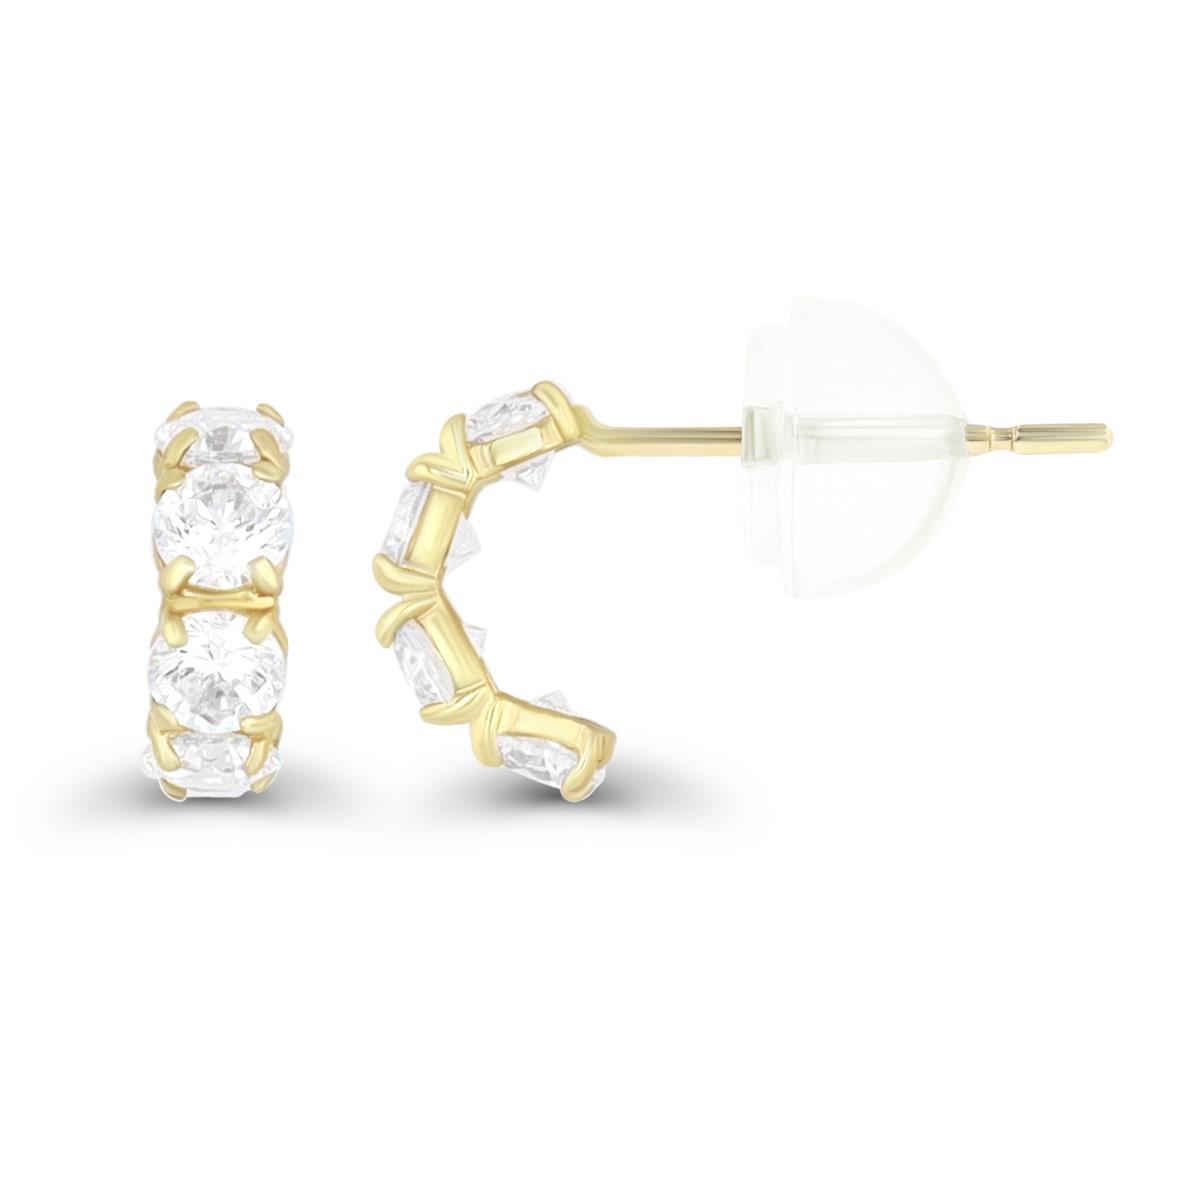 10K Yellow Gold 3mm Rd Prong 4-Stone Curved Stud Earring & 10K Silicone Back